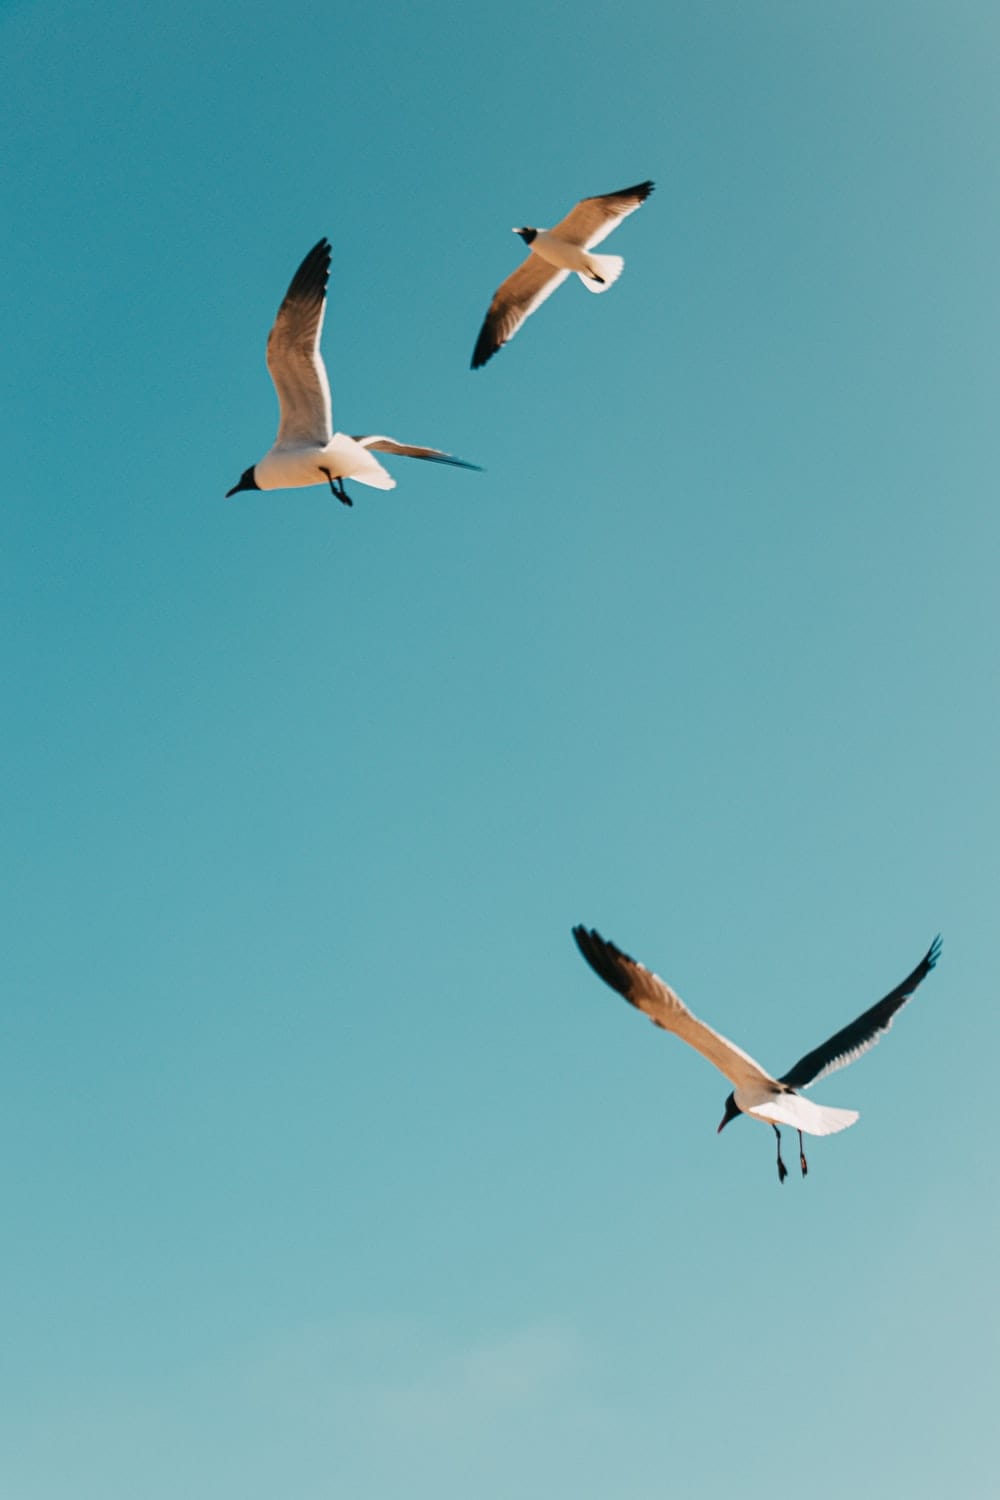 Cross Stitch | Bird - White And Black Birds Flying Under Blue Sky During Daytime - Cross Stitched